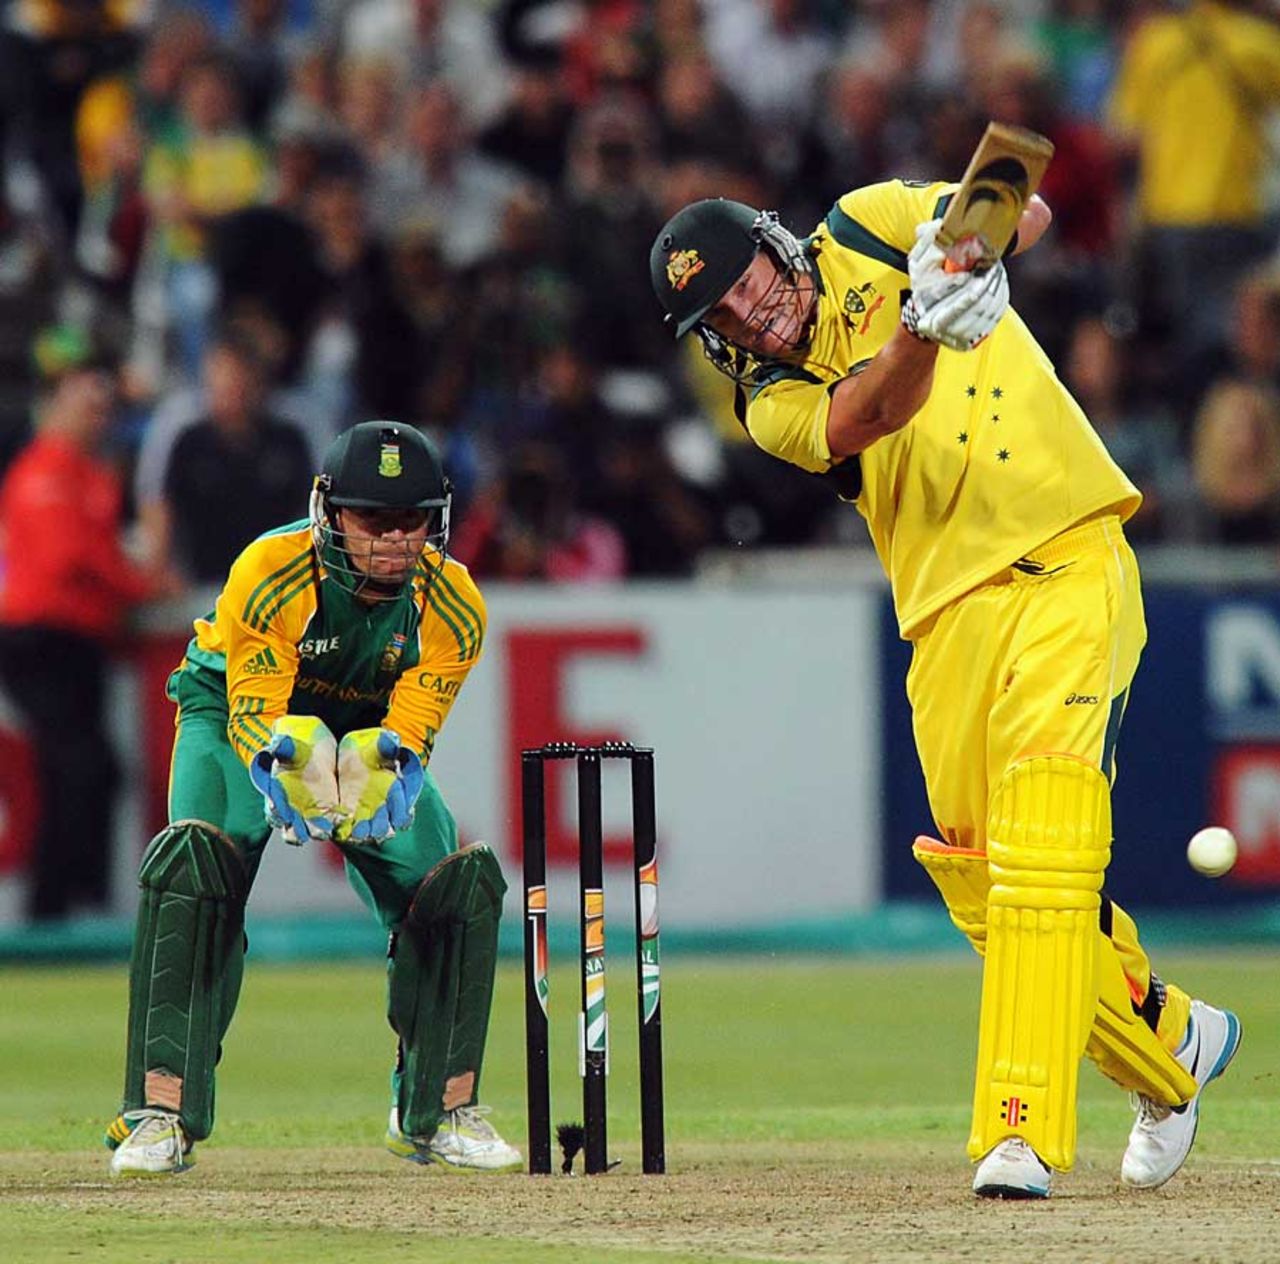 Cameron White uses his feet to hit down the ground, South Africa v Australia, 1st Twenty20, Cape Town, October 13, 2011